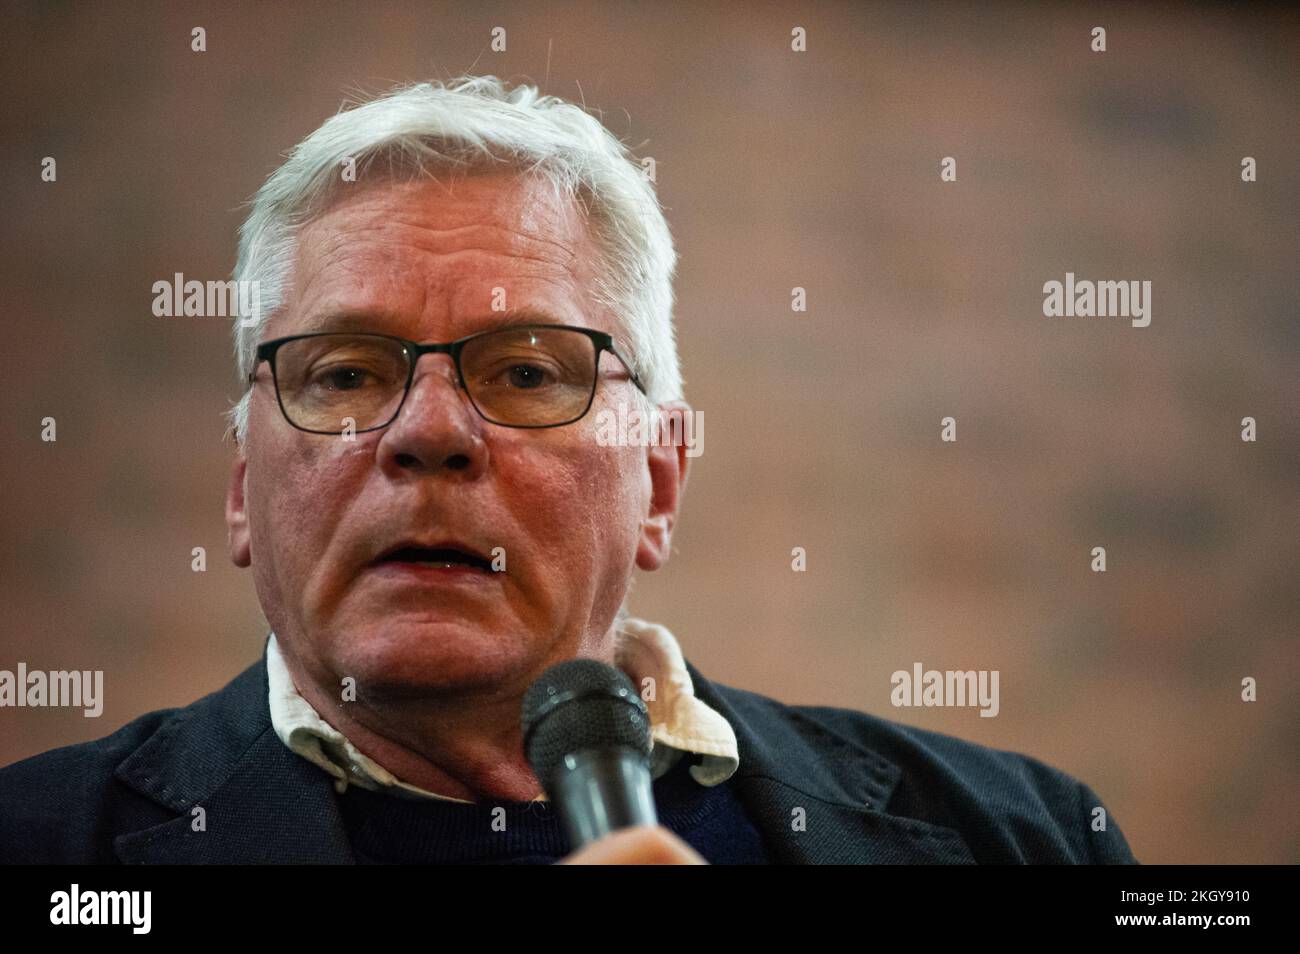 Kristinn Hrafnsson, chief editor of WikiLeaks speaks during a discussion on freedom of expression at Colombia's National University, in Bogota, Colomb Stock Photo